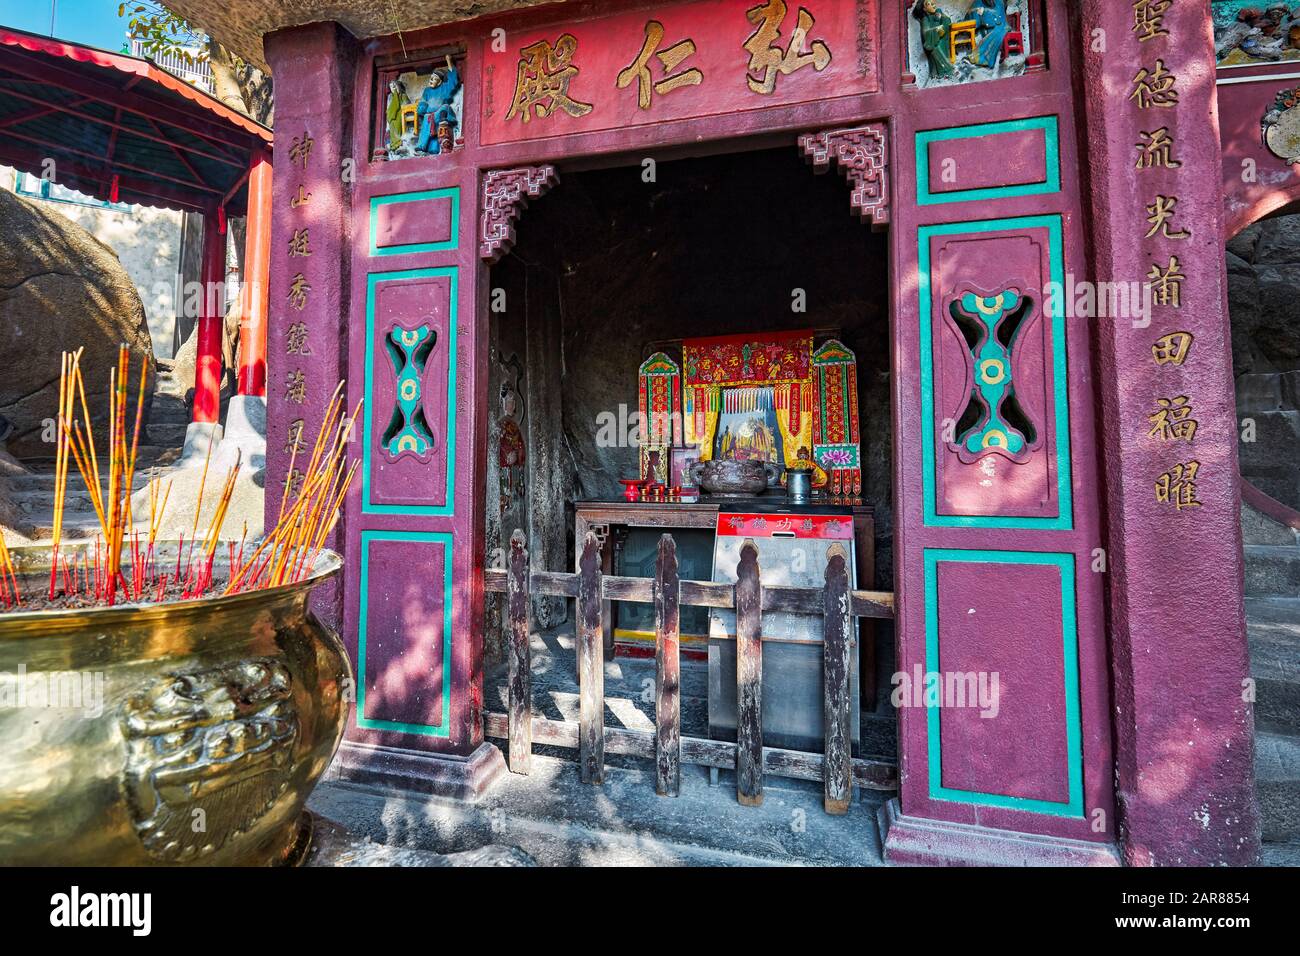 The Hongren Hall (the Hall of Benevolence), the oldest (1488) structure at the A-Ma Temple. Macau, China. Stock Photo